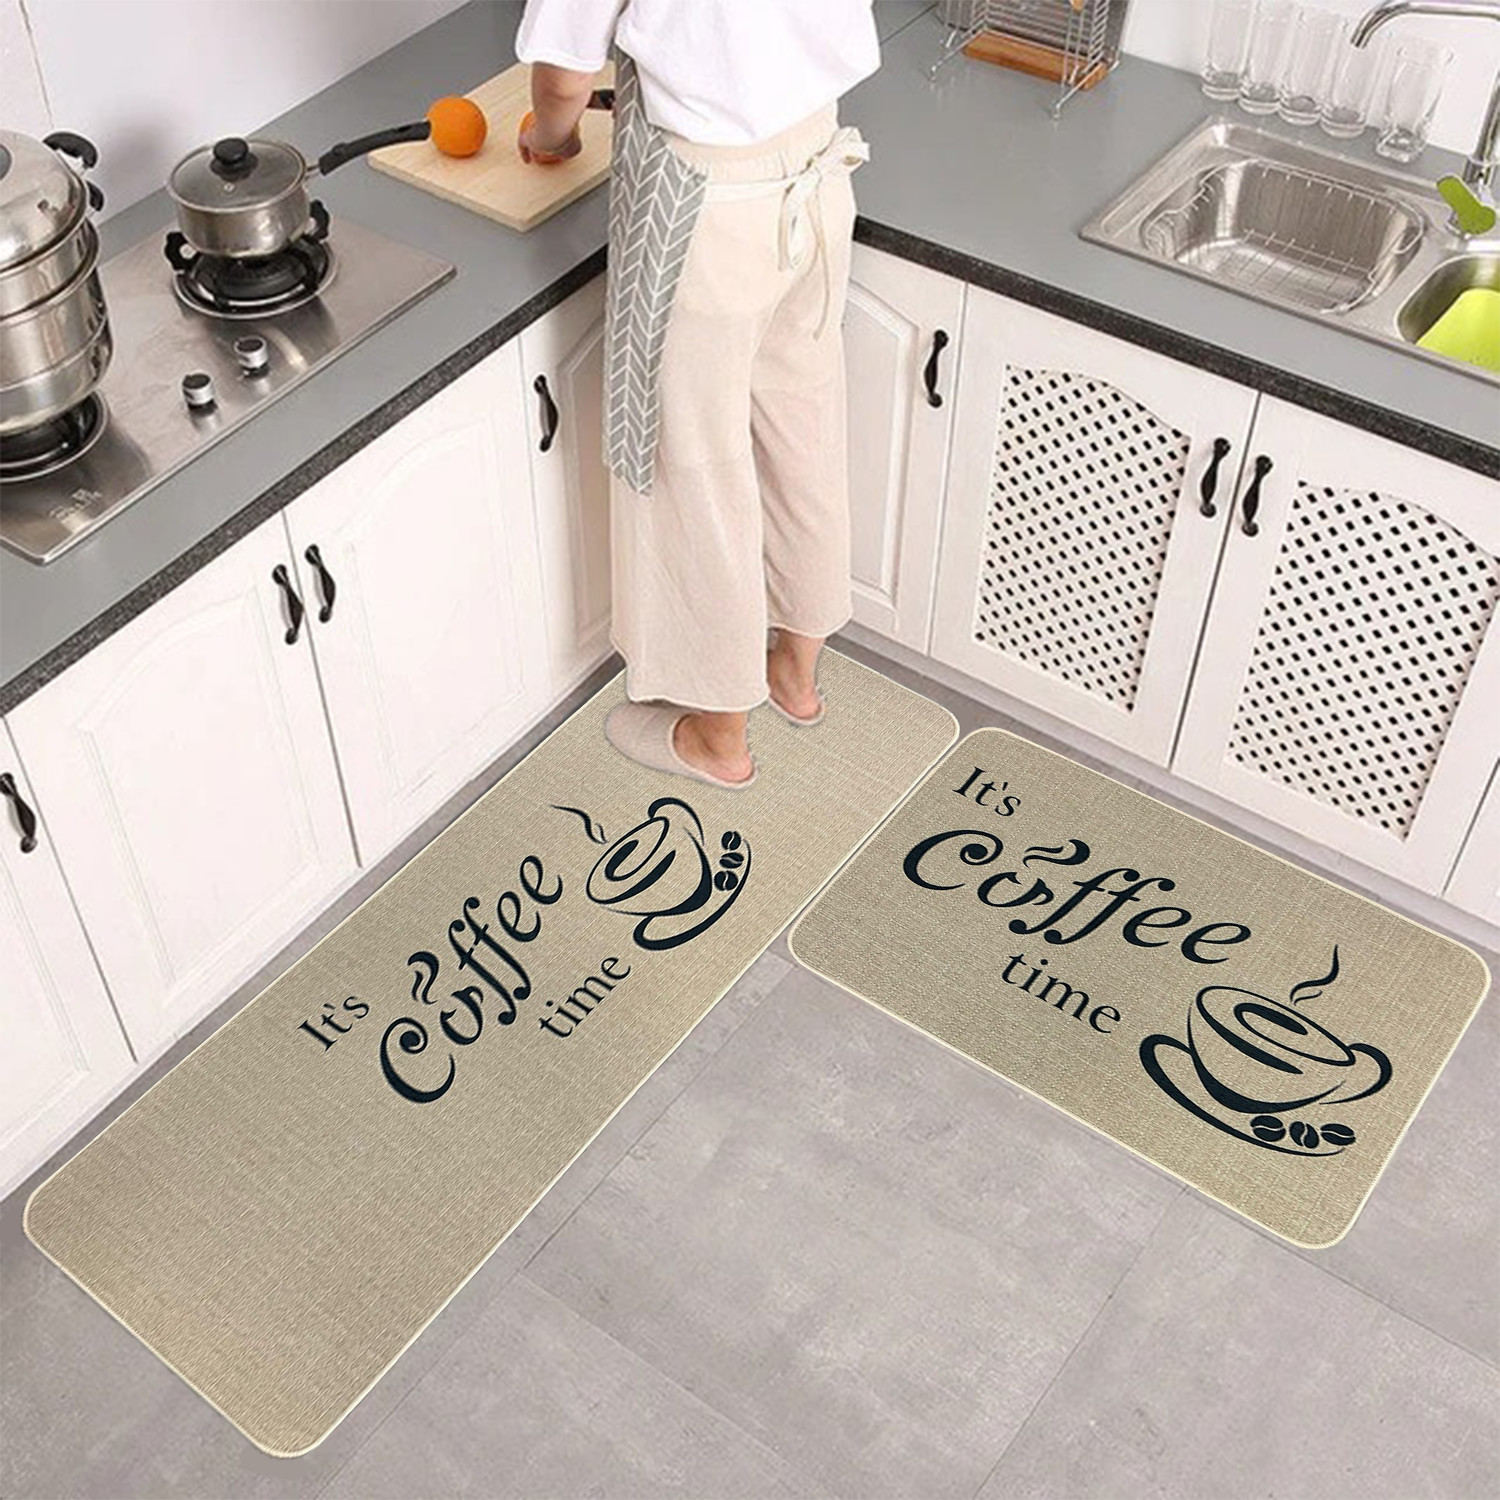 Kitchen+Rugs+Set%2C+2+Pieces+Kitchenware+Style+Non+Slip+Kitchen+Mat%2C+Easy+to+Clean+Comfort+Standing+Mats+for+Kitchens%2C+Home%2C+Office%2CLaundry